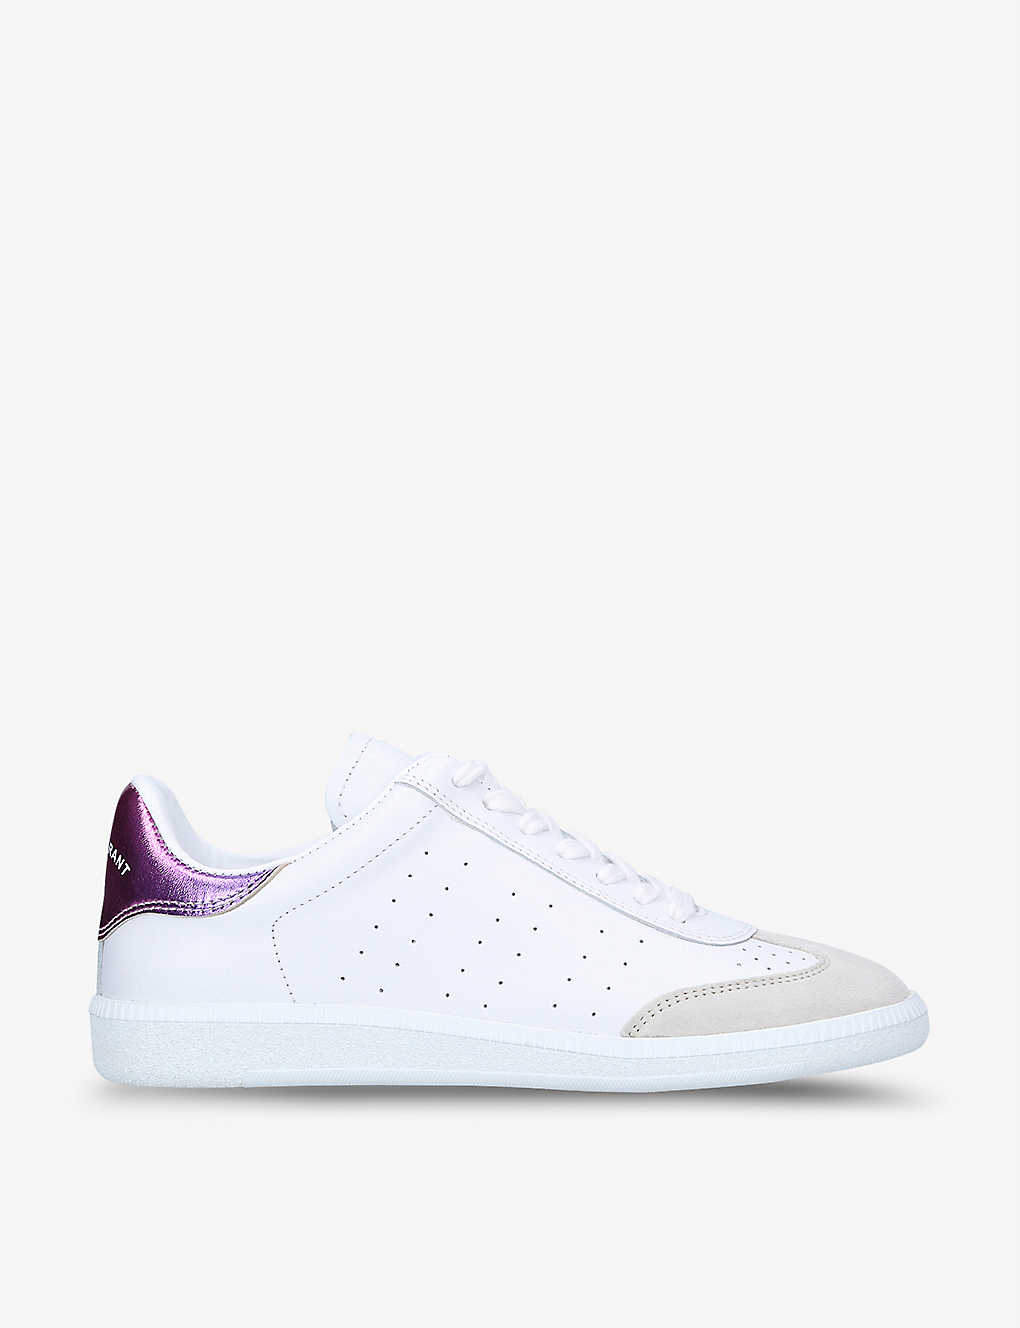 Isabel Marant Bryce Perforated Leather Trainers In White/comb